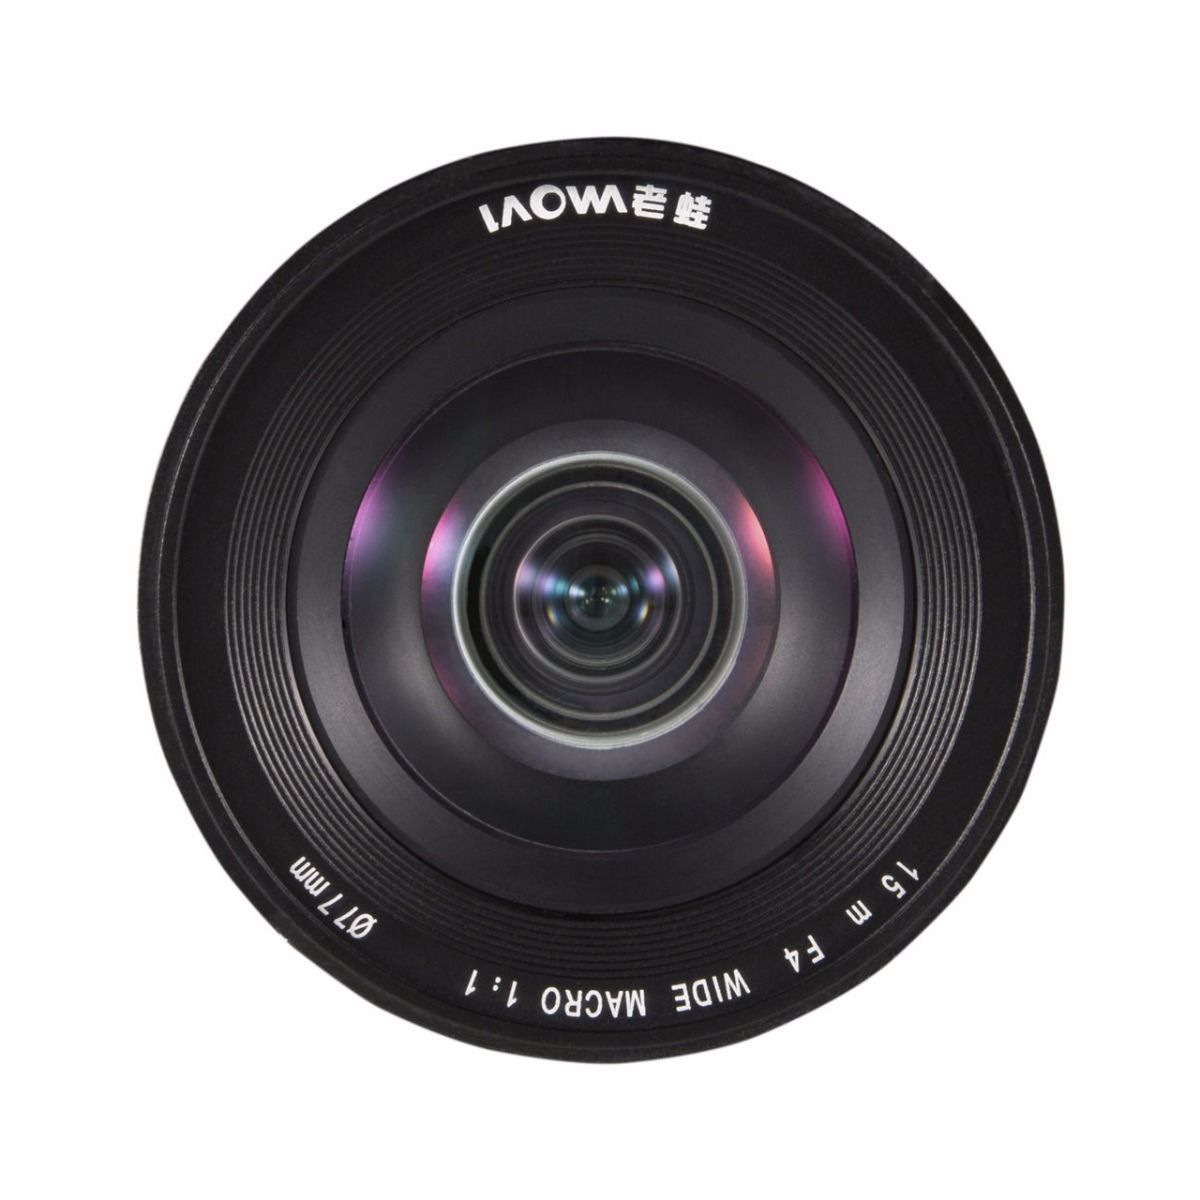 Laowa 15Mm F/4 Macro Lens With Shift Manual Focus Canon EF